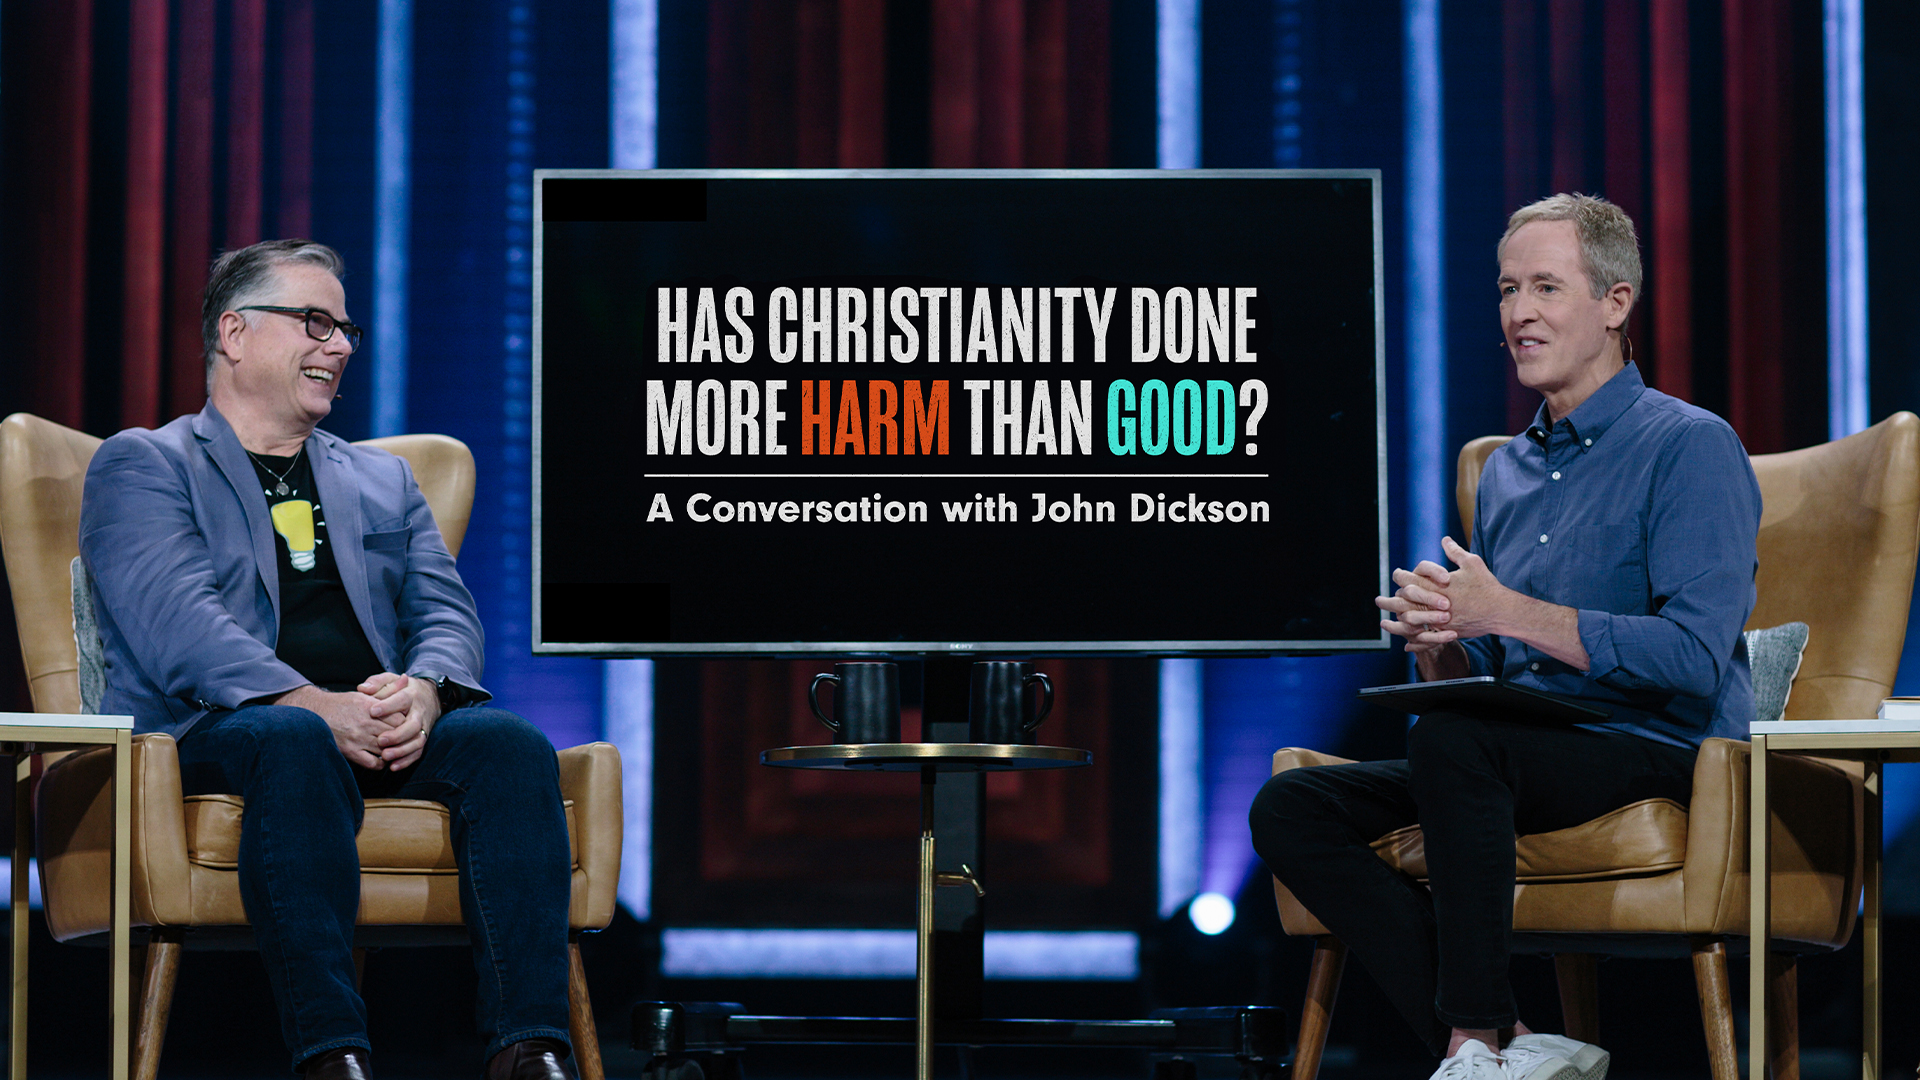 Has Christianity Done More Harm than Good?